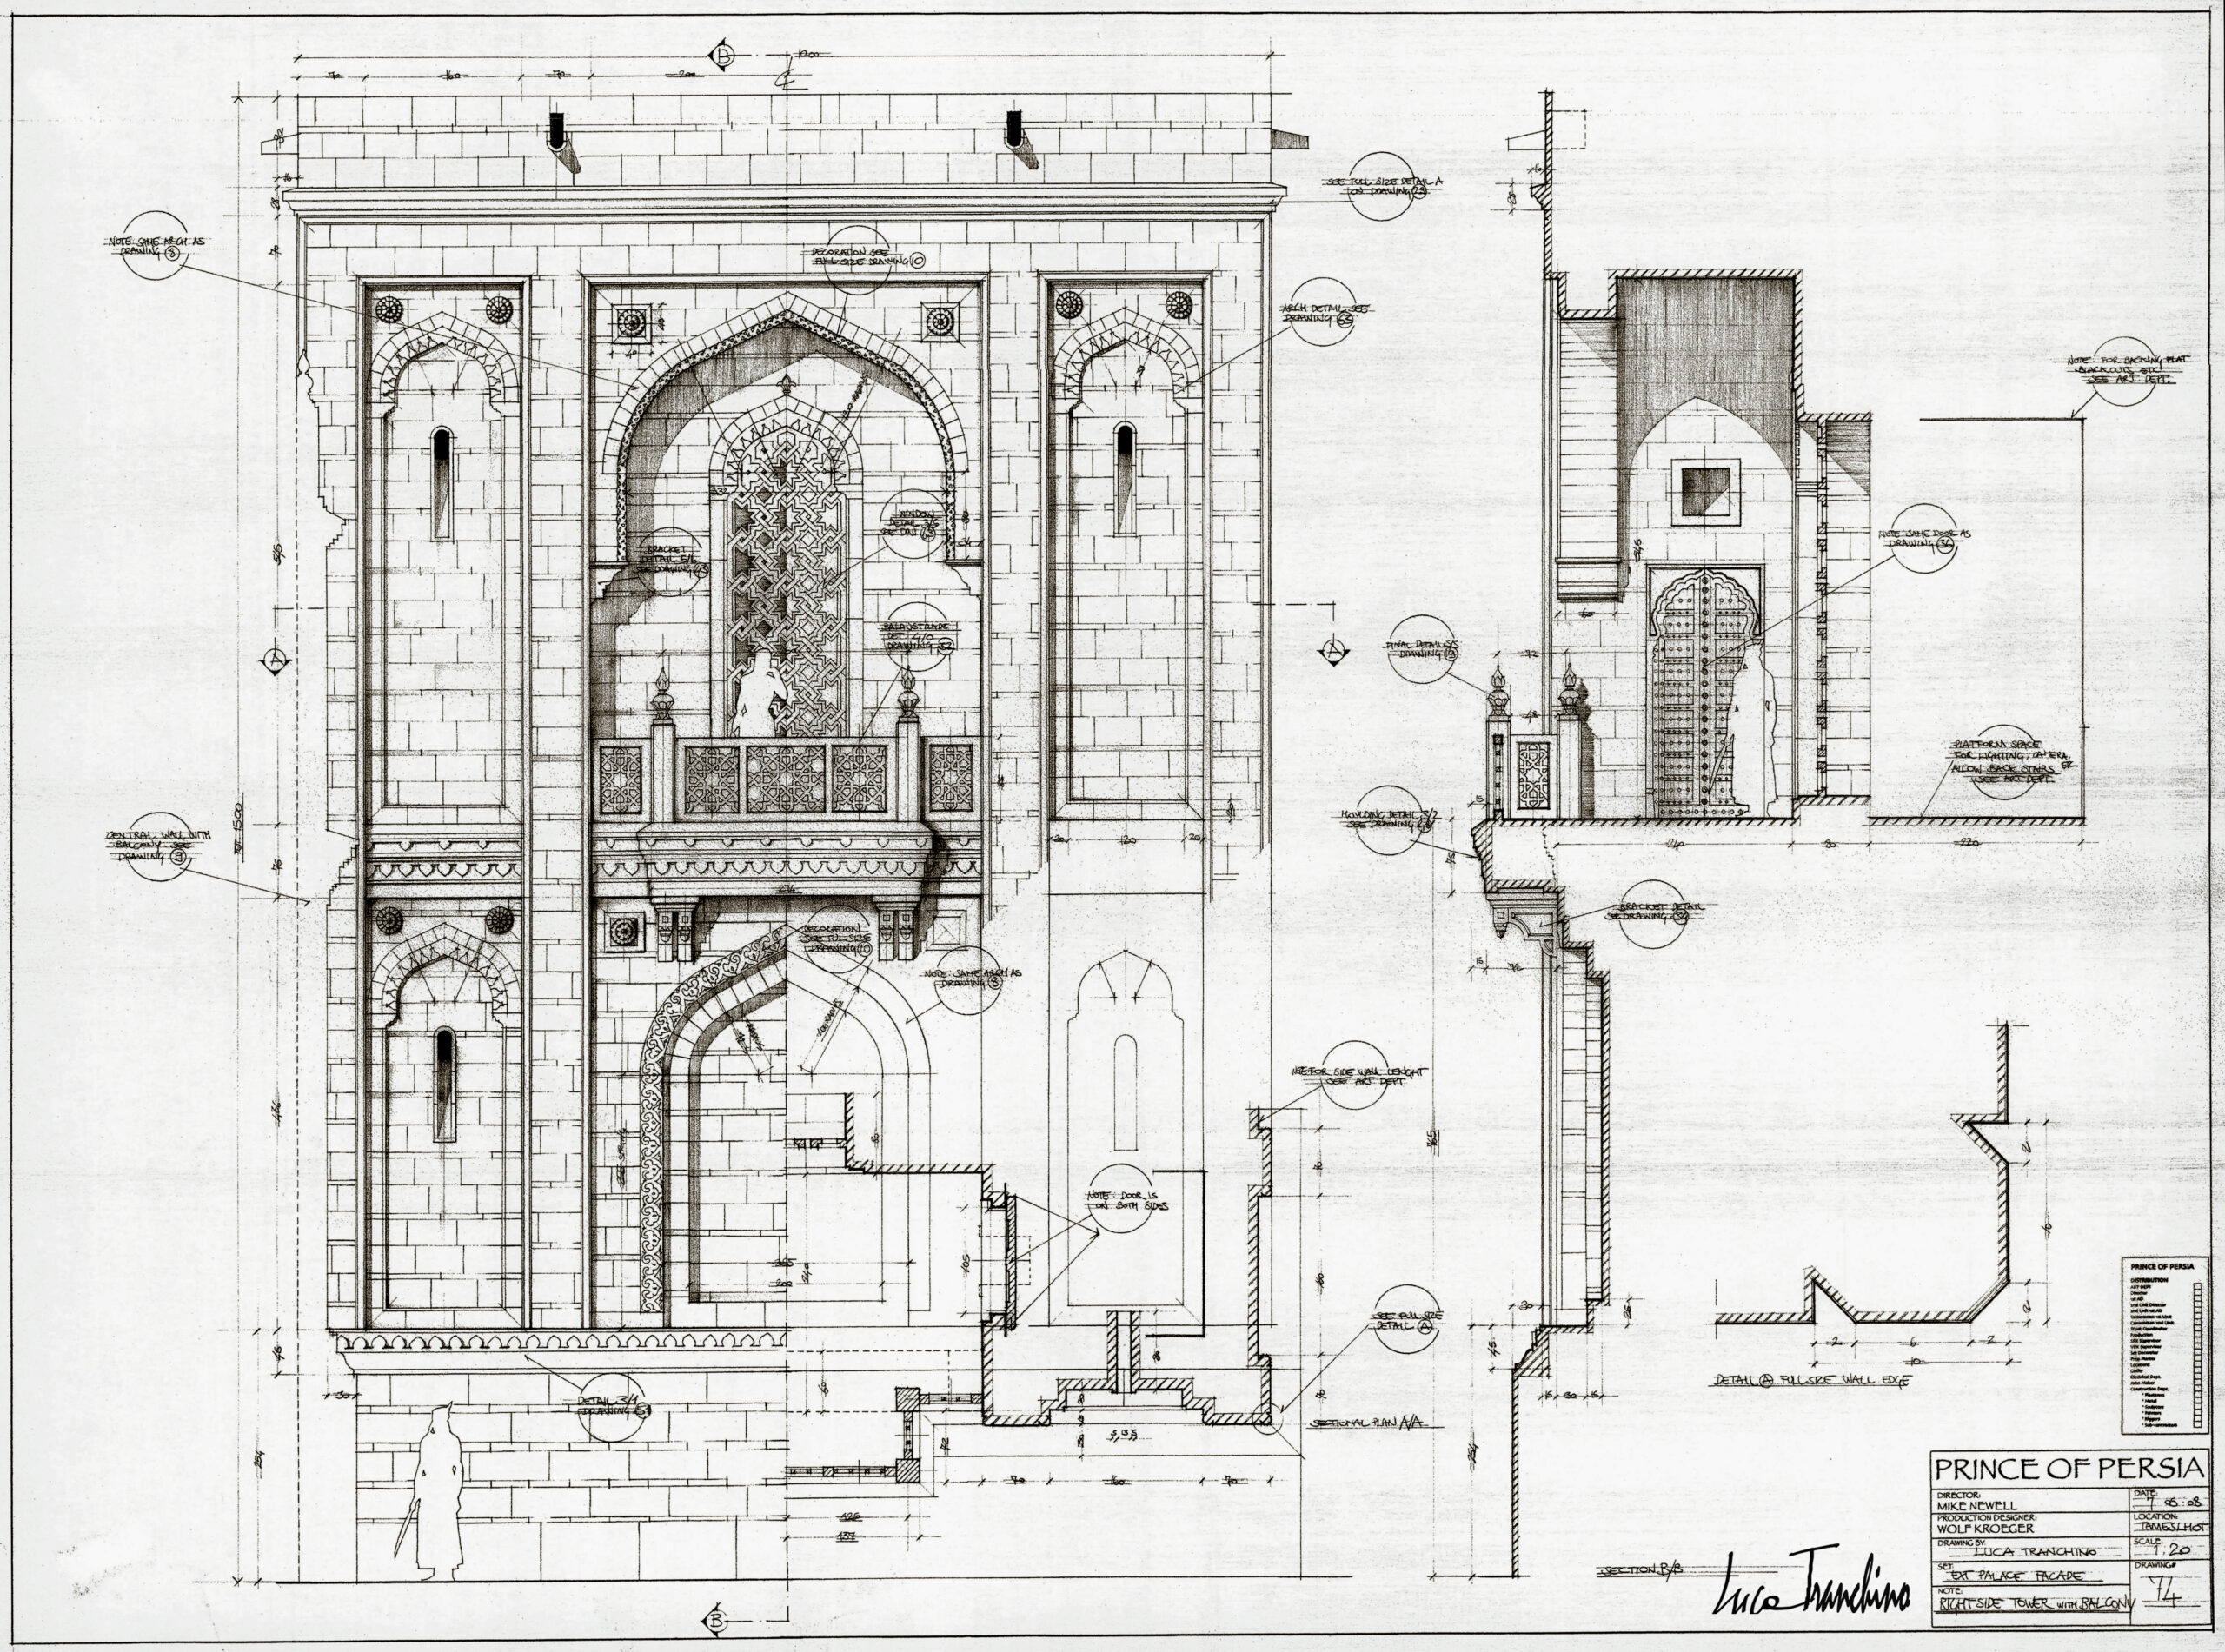 PRINCE OF PERSIA - Directed by Mike Newel - Ext. Palace, Technical Drawings by Luca Tranchino - ©2010 - Walt Disney Pictures